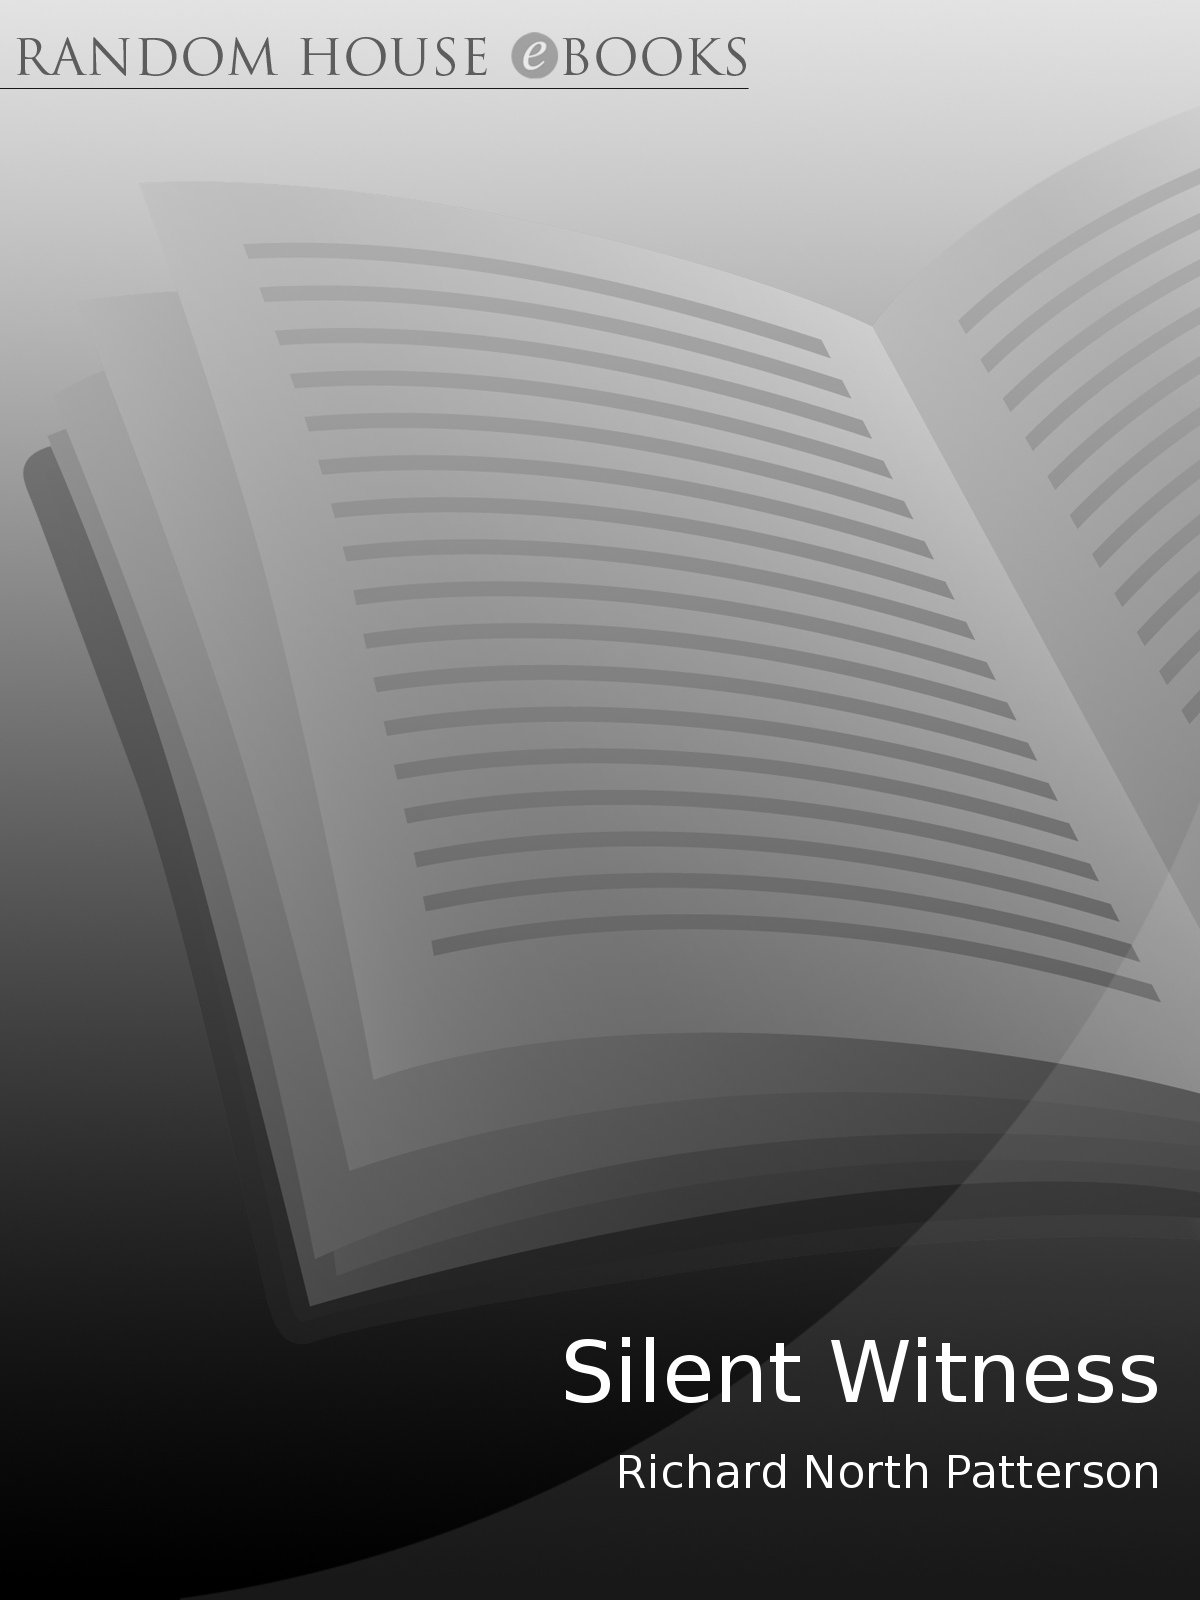 Silent Witness (1998) by Richard North Patterson